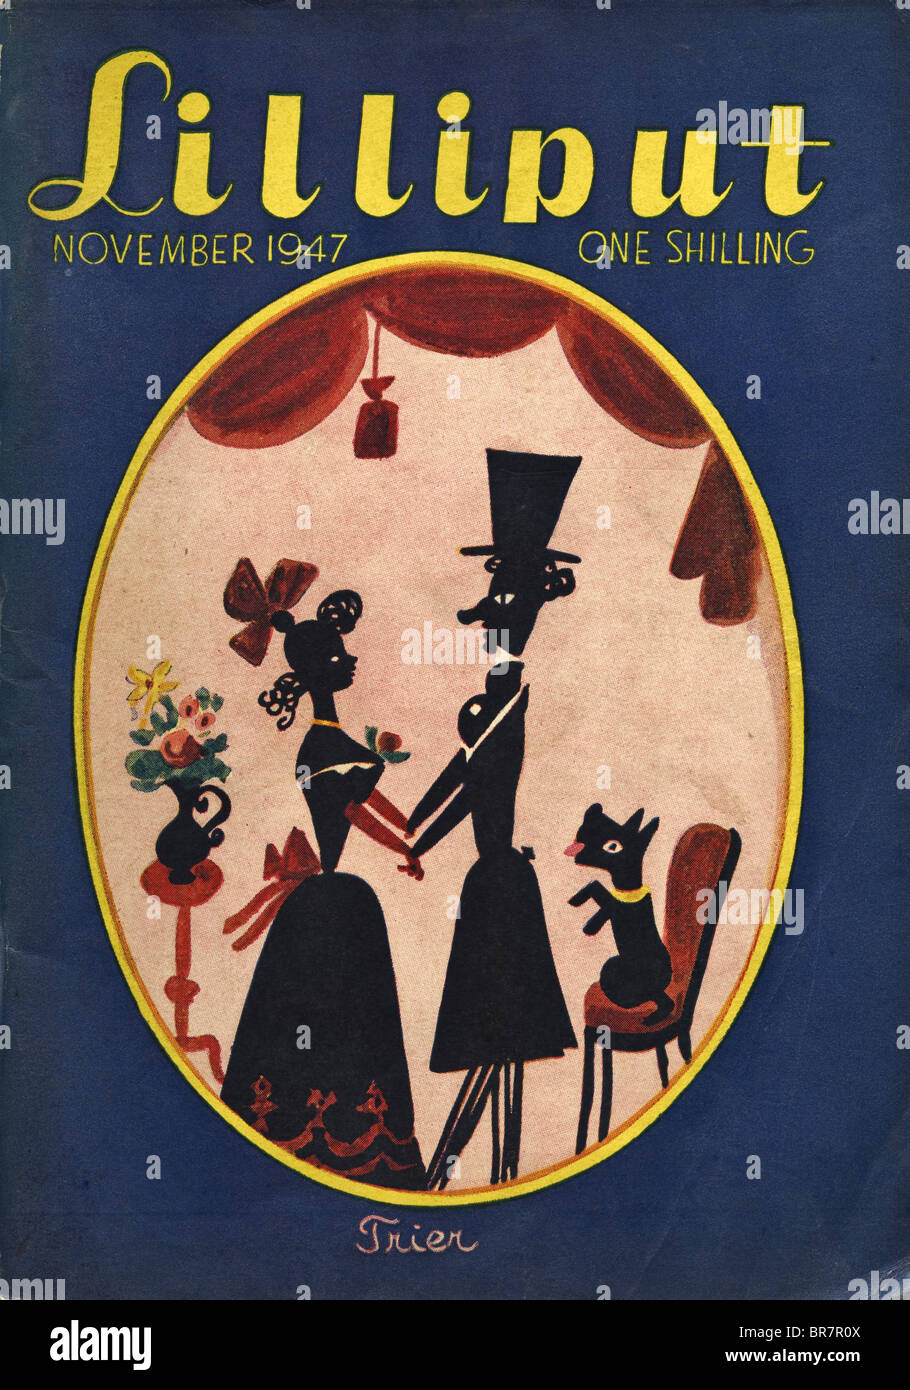 Lilliput magazine cover with illustration by Walter Trier dated November 1947 priced at one shilling Stock Photo